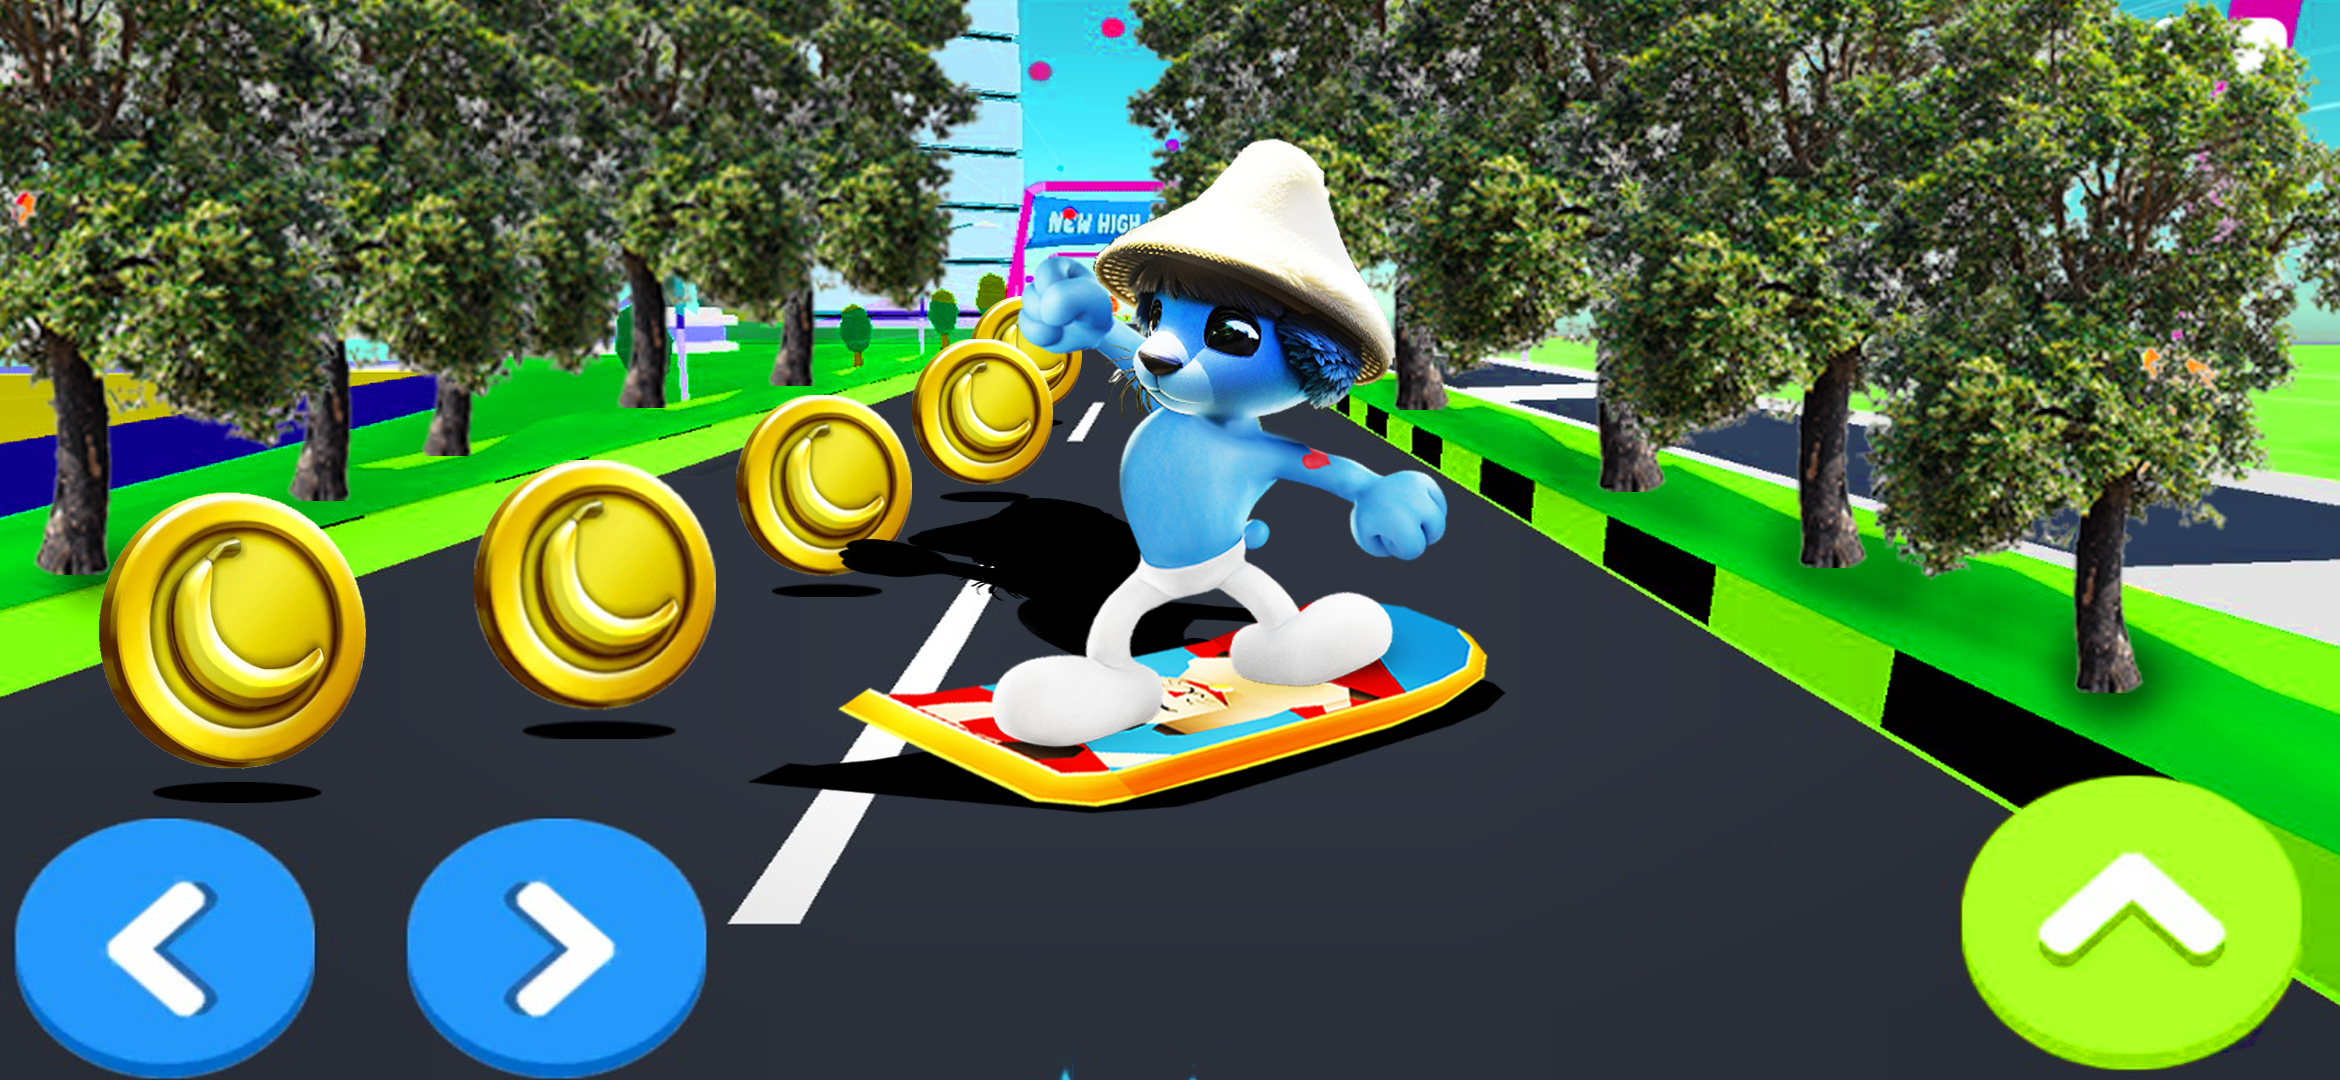 smurf cat: jump game! - Apps on Google Play